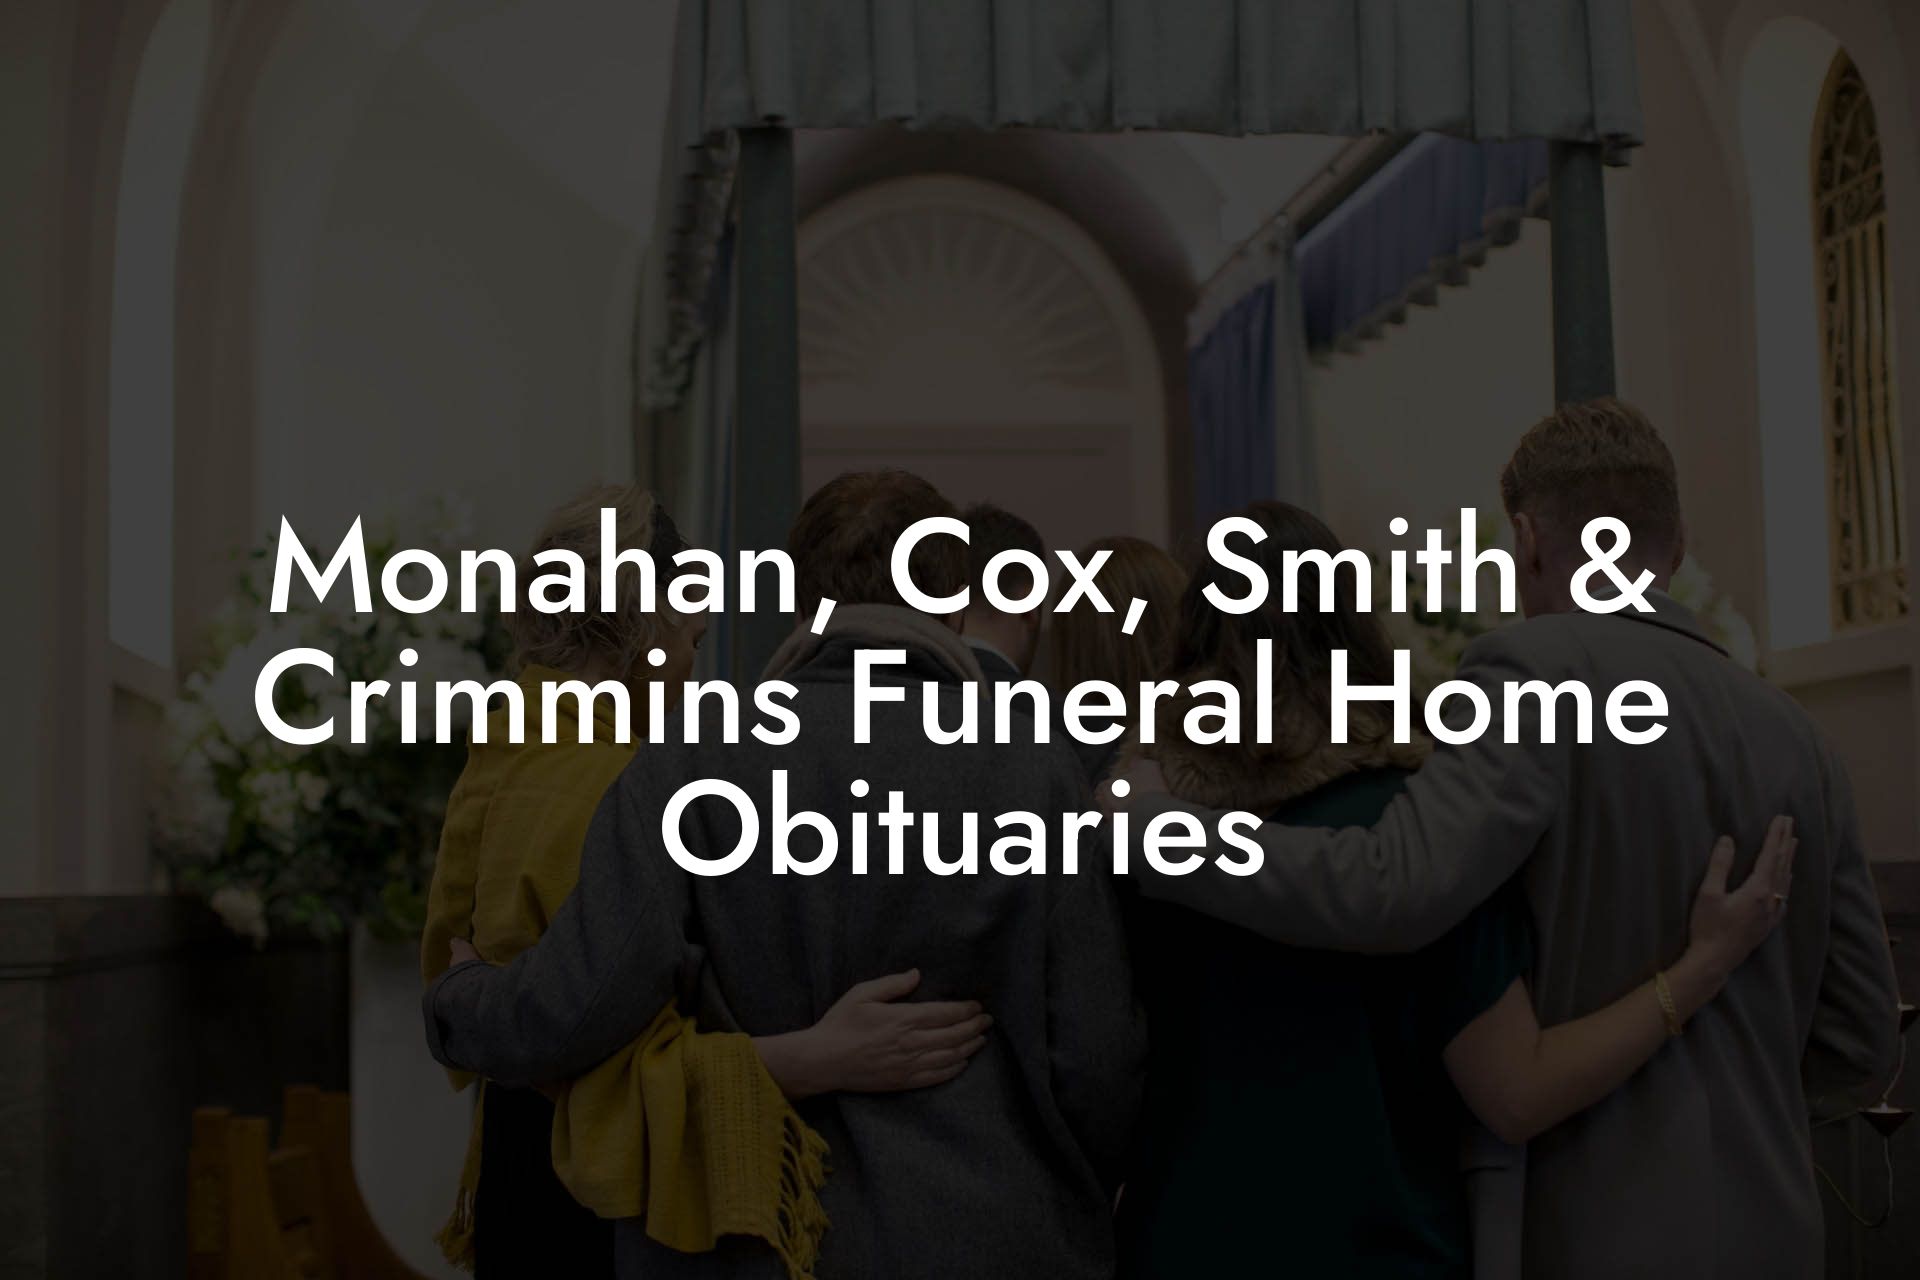 Monahan, Cox, Smith & Crimmins Funeral Home Obituaries